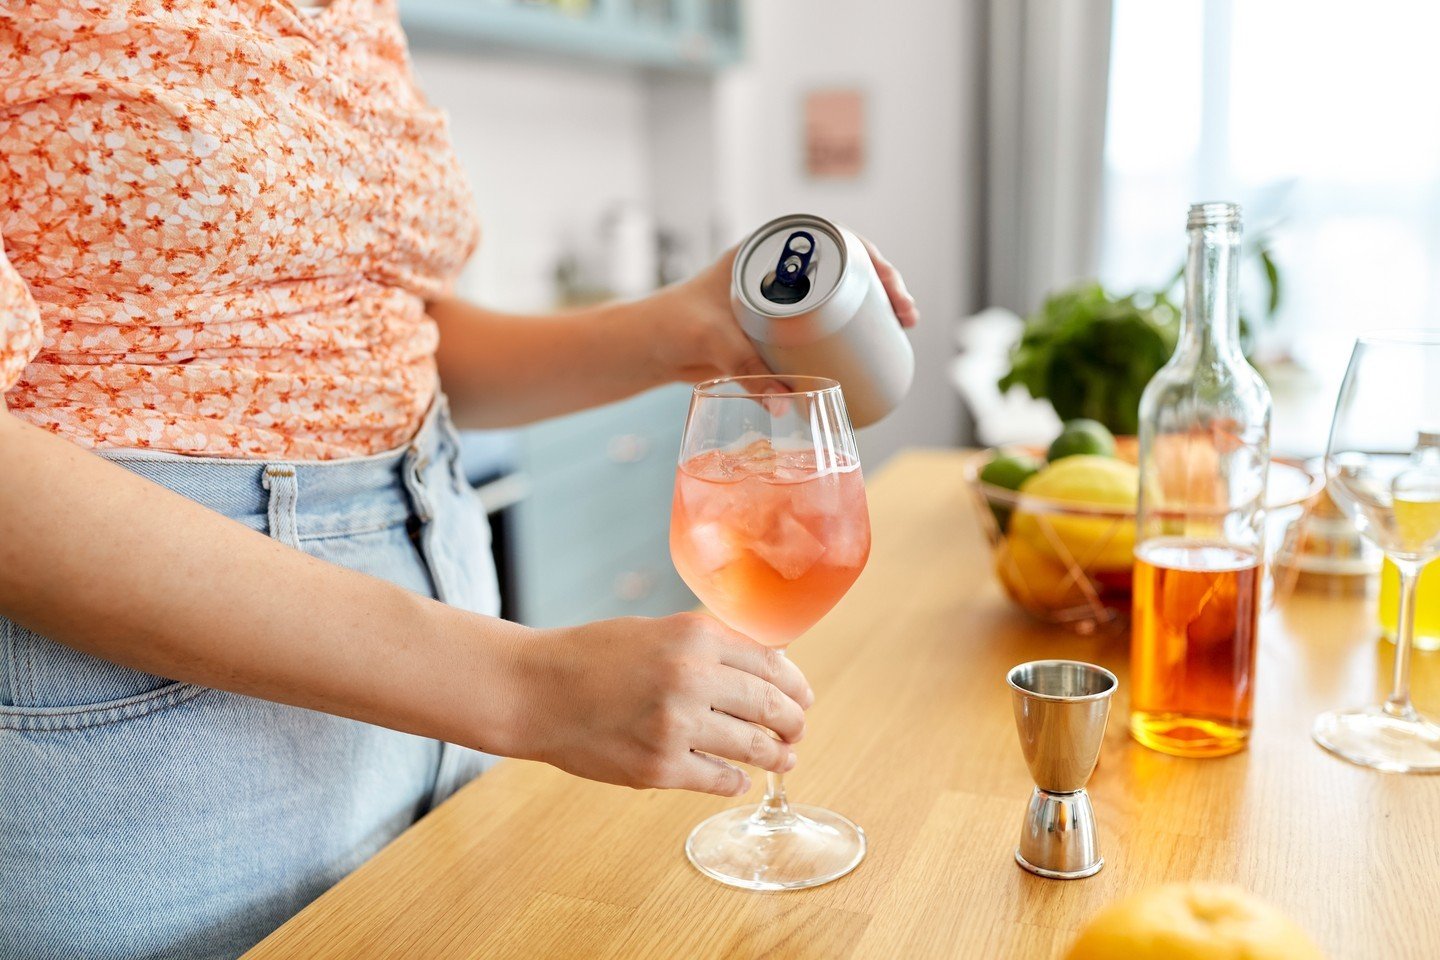 Mixology is about more than ingredients. Techniques like carbonation can elevate your cocktails, adding fizz and effervescence.

Try using a soda siphon or carbonation system to infuse bubbles seamlessly into any drink. Experiment with different leve